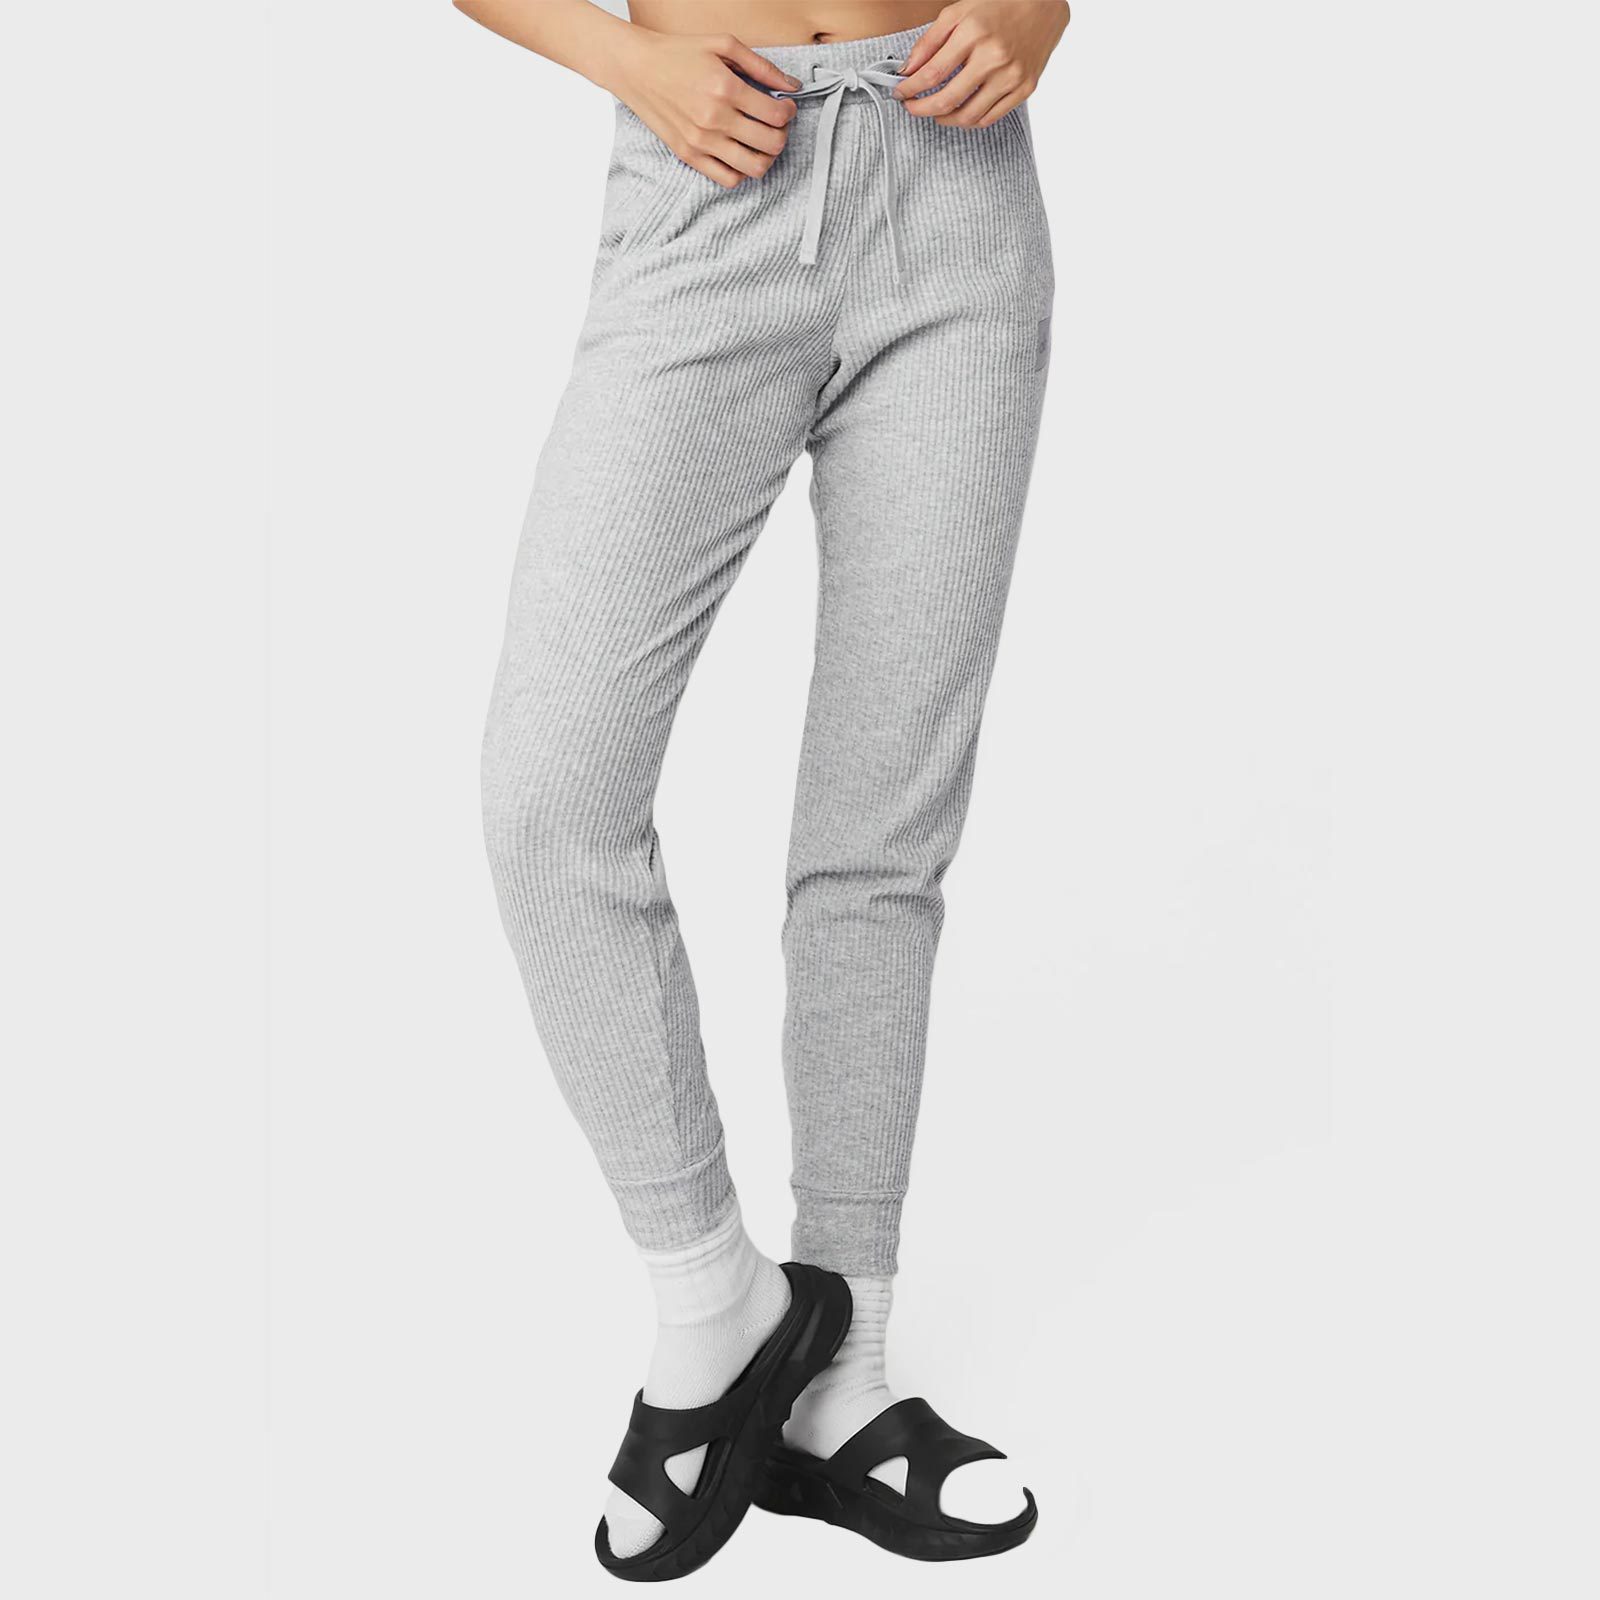 21 Best Sweatpants for Women 2023 | Joggers, Cashmere and More